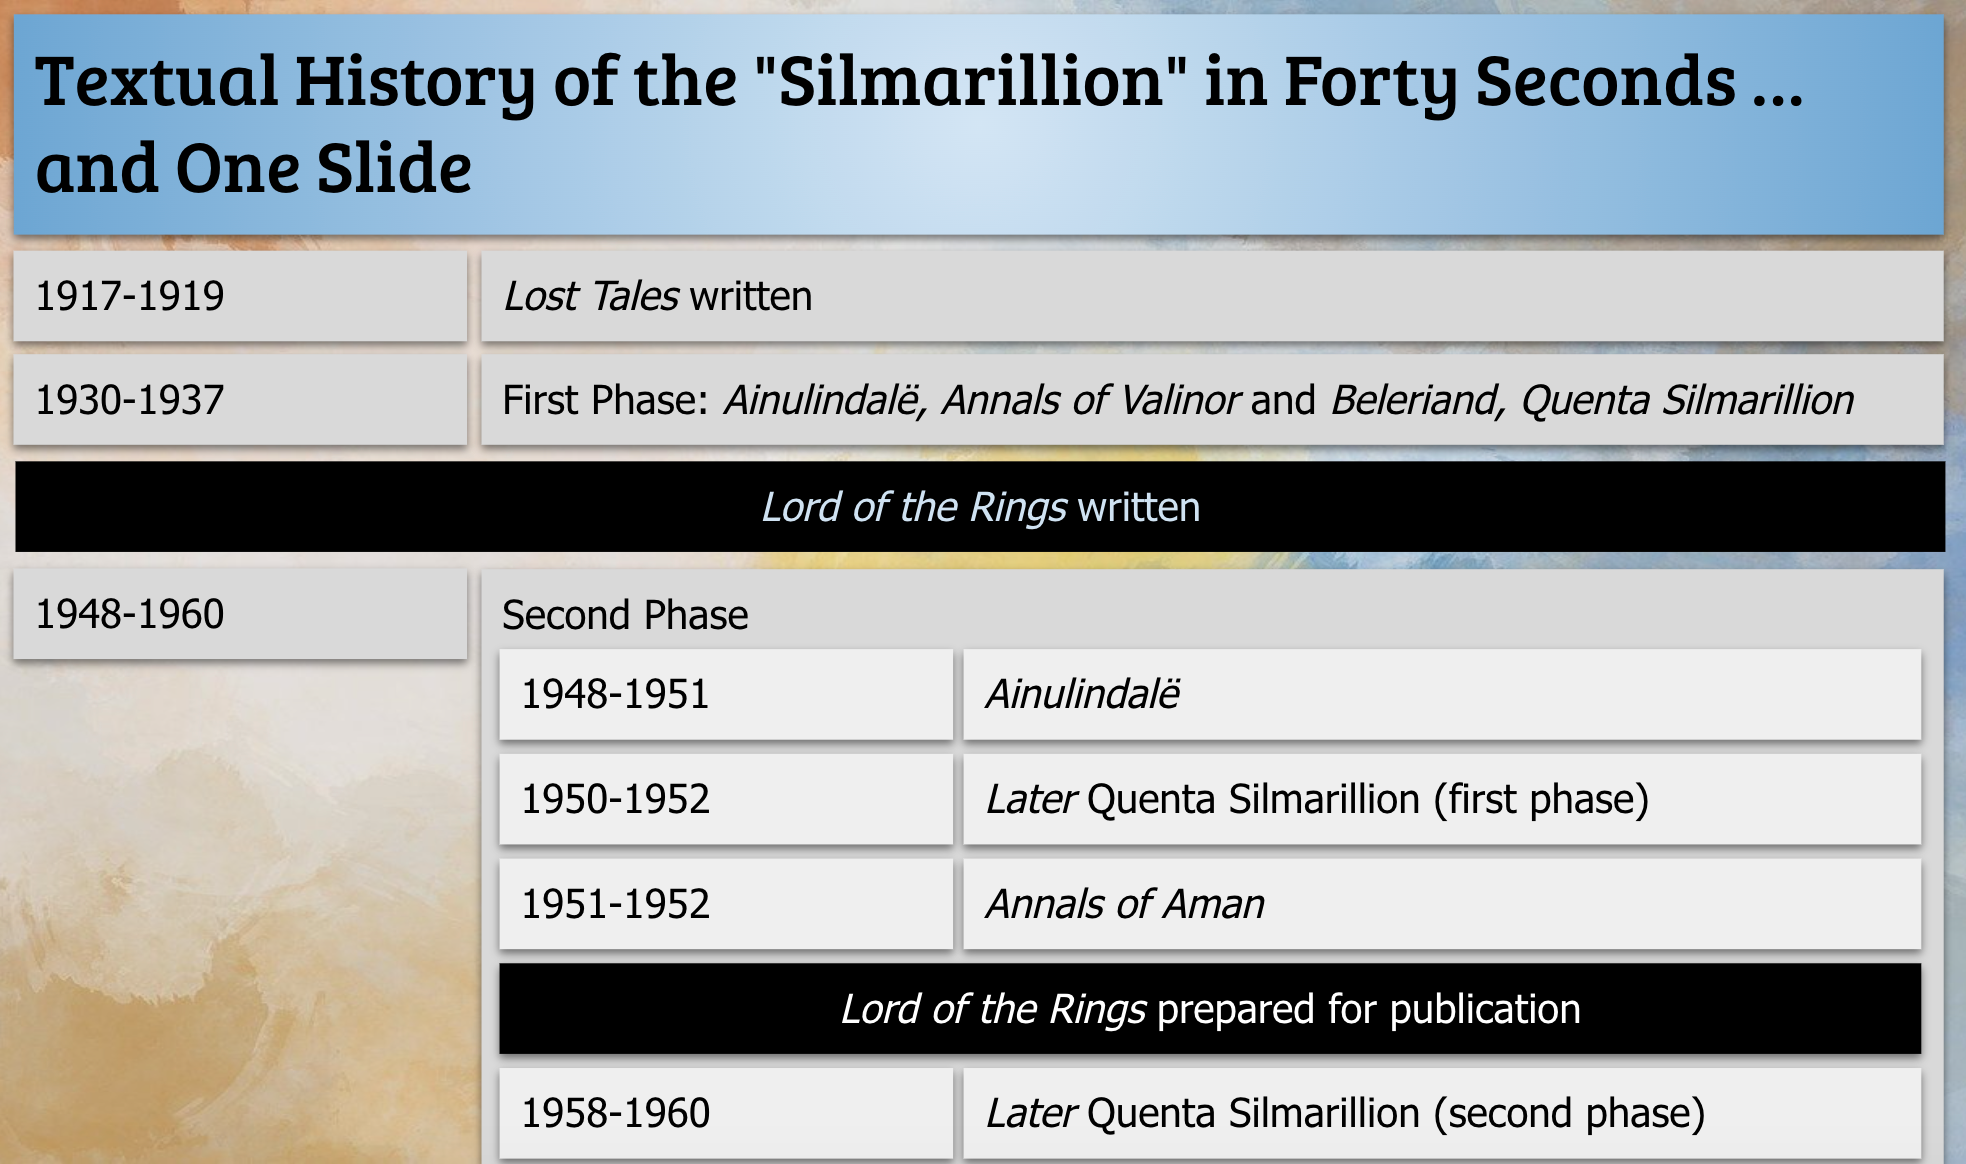 Textual History of the 'Silmarillion' in Forty Seconds … and One Slide. 1917-1919: Lost Tales written. 1930-1937: First Phase: Ainulindalë, Annals of Valinor and Beleriand, Quenta Silmarillion. Lord of the Rings written. 1948-1960: Second Phase. 1948-1951: Ainulindalë. 1950-1952: Later Quenta Silmarillion (first phase). 1951-1952: Annals of Aman. Lord of the Rings prepared for publication. 1958-1960: Later Quenta Silmarillion (second phase).